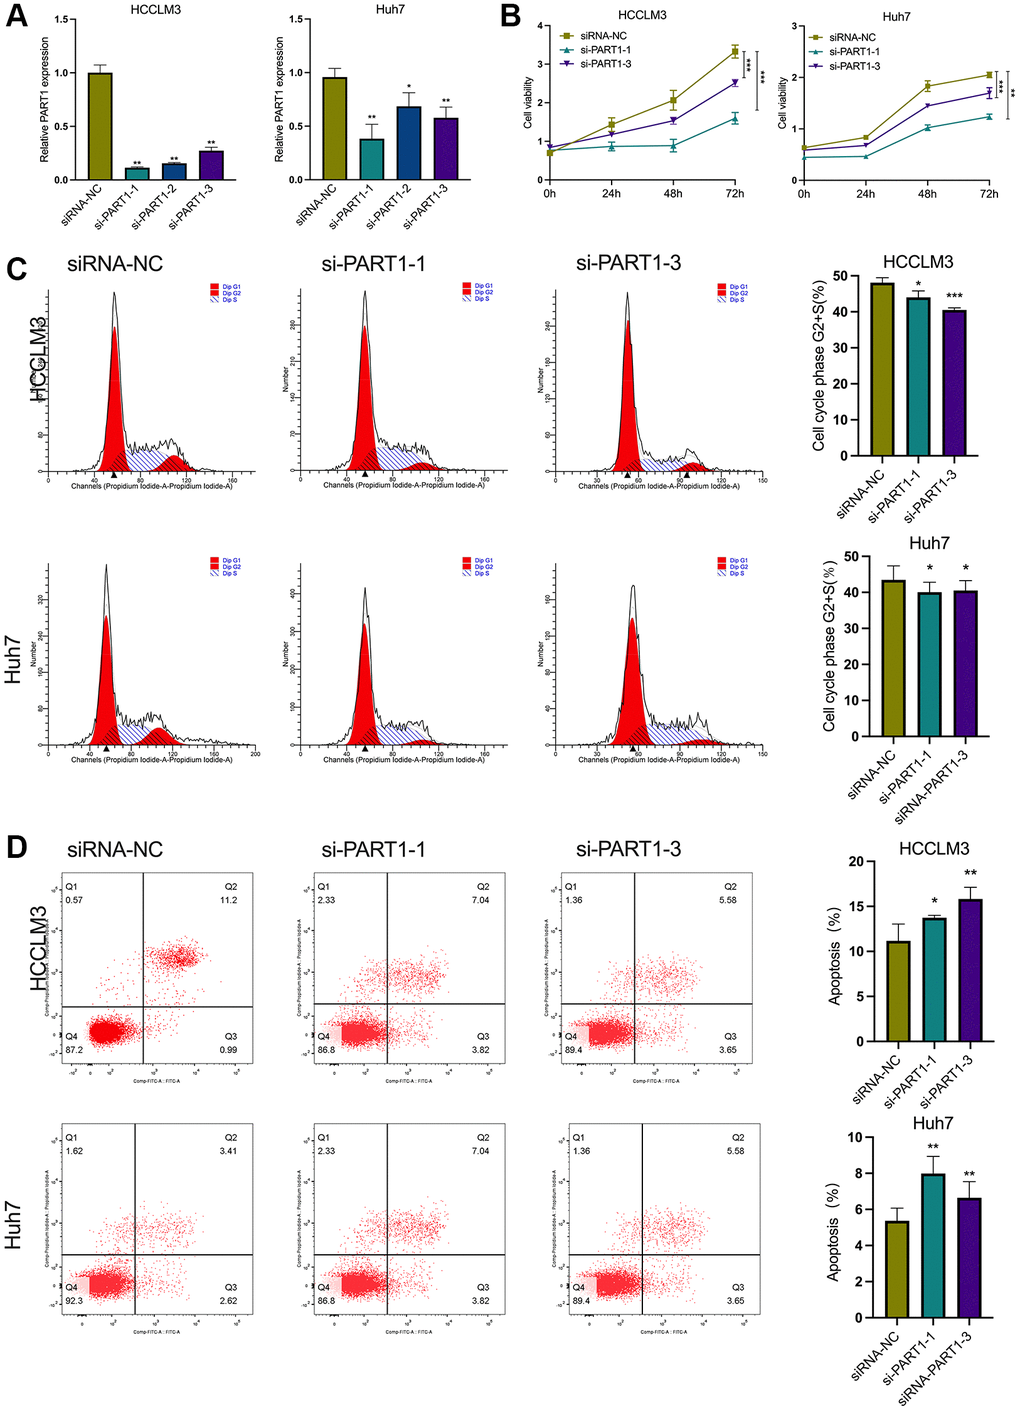 PART1 promotes proliferation and inhibits apoptosis of HCC cells. (A) The relative expression of PART1 was measured by RT-qPCR in HCCLM3 and Huh7 cells transfected with siRNA-PART1.1, -PART1.2, and -PART1.3. (B) CCK-8 assay was conducted to evaluate the proliferation of HCCLM3 and Huh7 cells transfected with siRNA-PART1.1 and -PART1.3. (C, D) The cell cycle and cell apoptosis rate of HCCLM3 and Huh7 cells transfected with siRNA-PART1.1 and -PART1.3 were assessed by flow cytometry analysis. *p **p ***p 